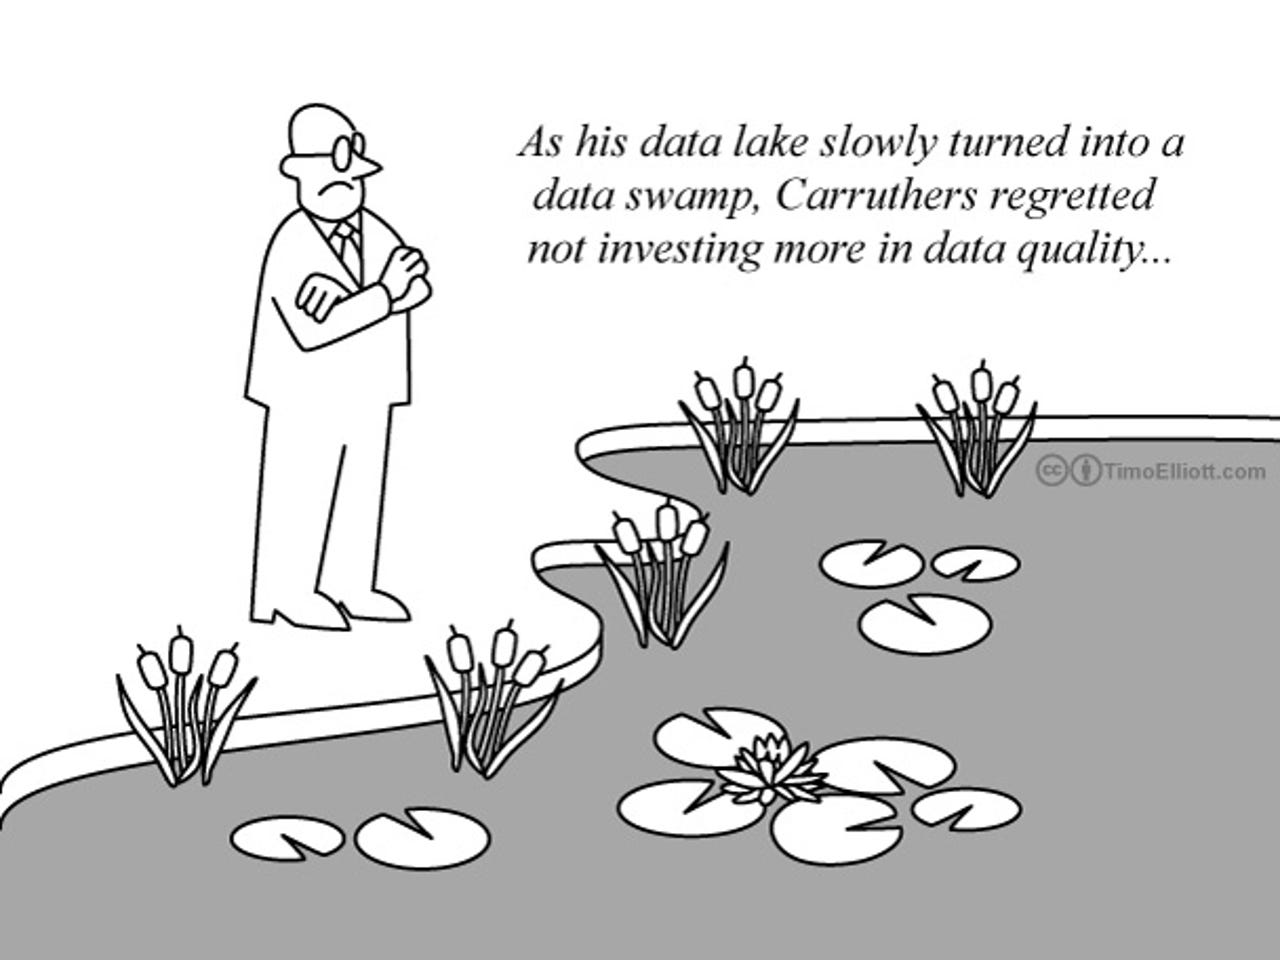 From Data Lake to Data Swamp